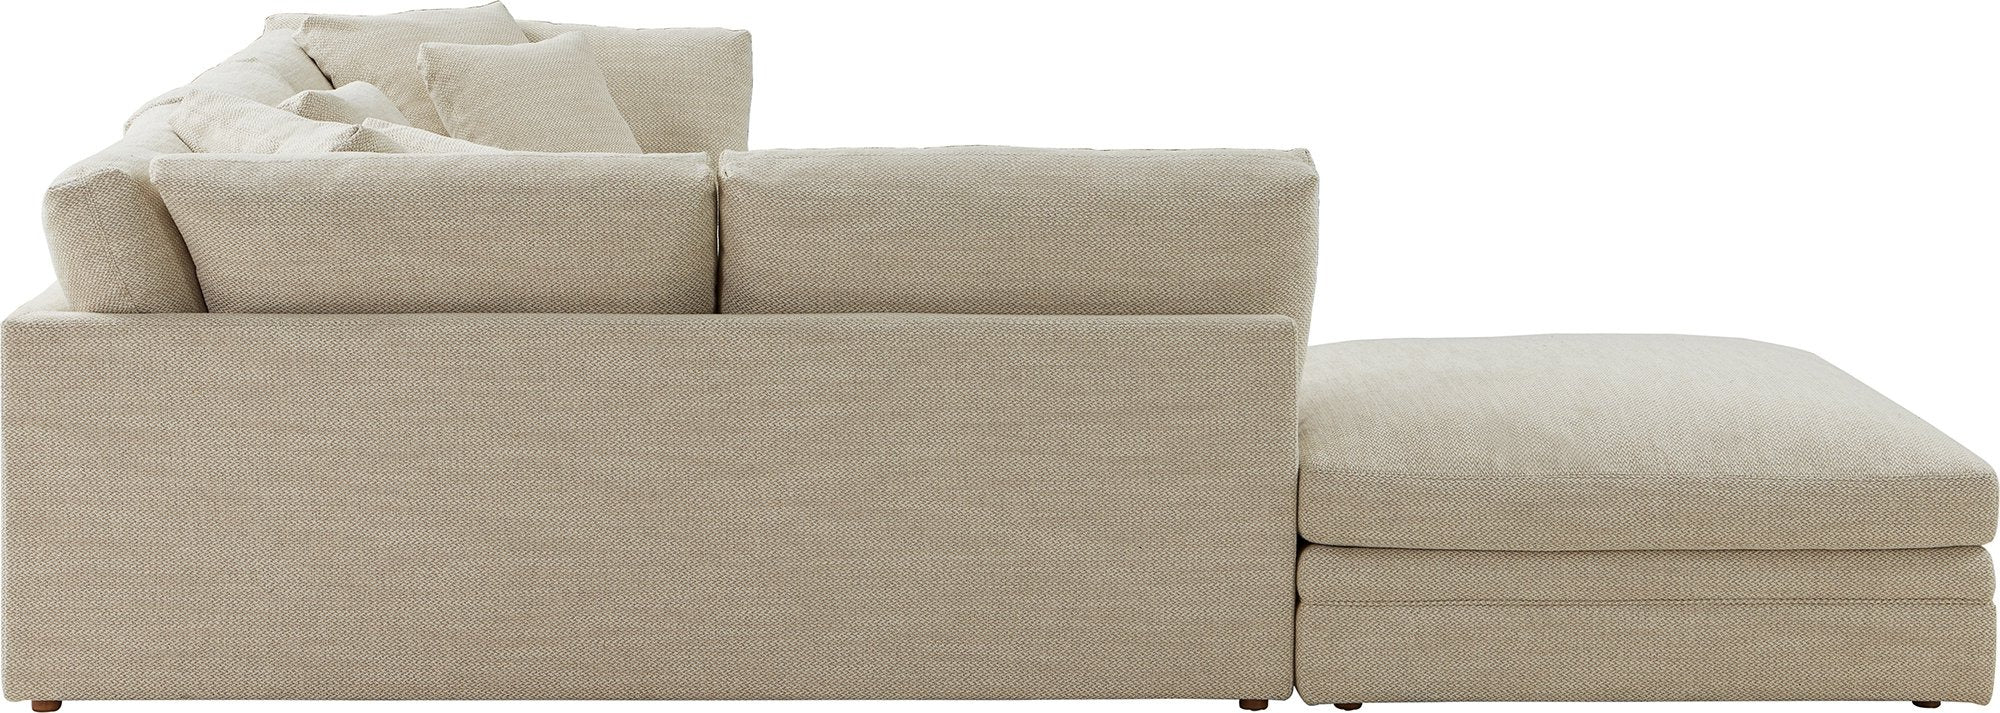 Feel Good Sectional with Ottoman, Left, Oyster - Image 6